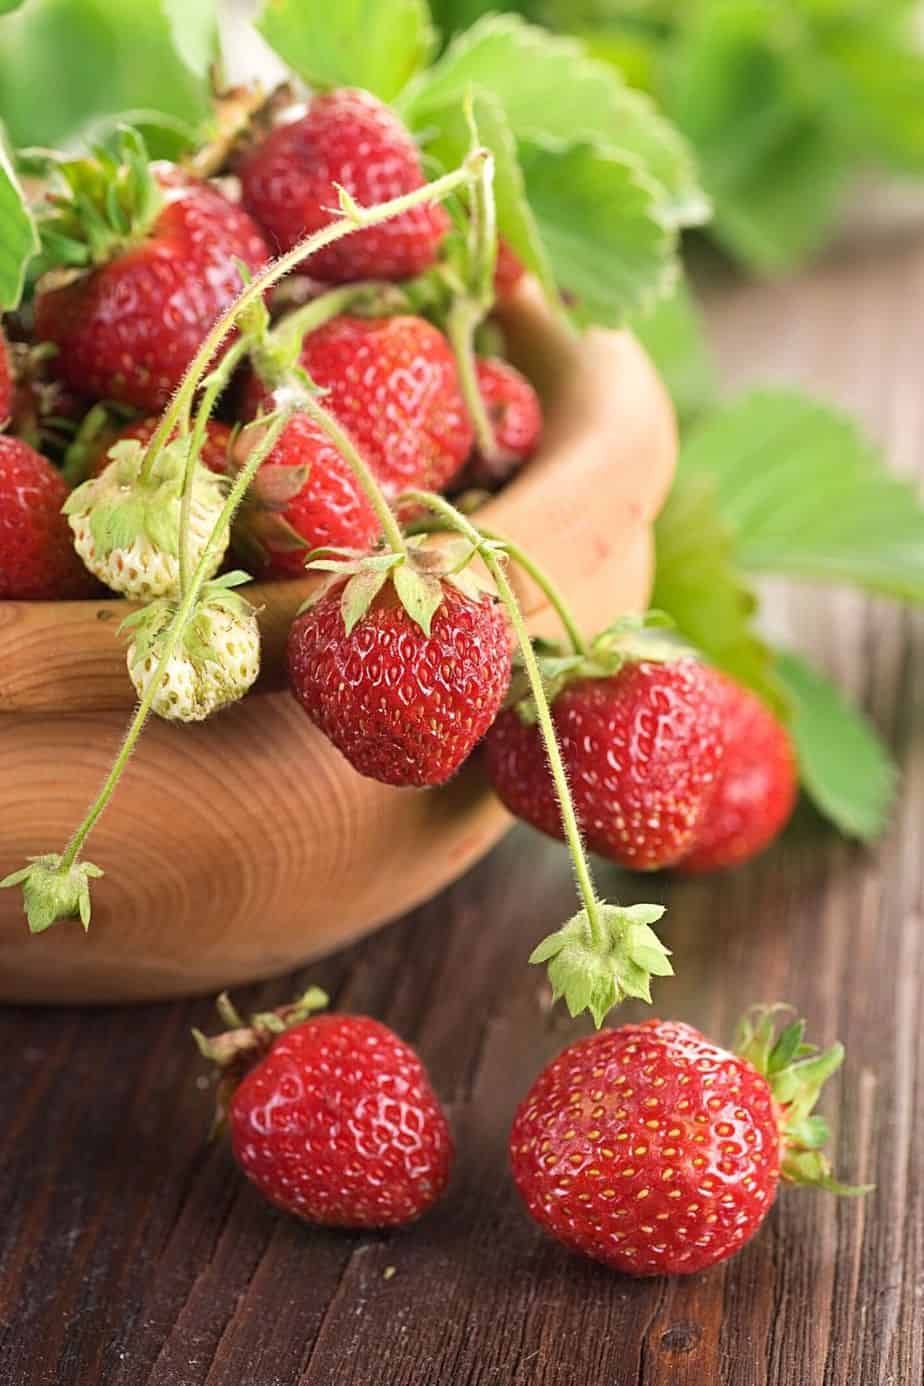 Strawberries can also be grown on your west-facing balcony in pots